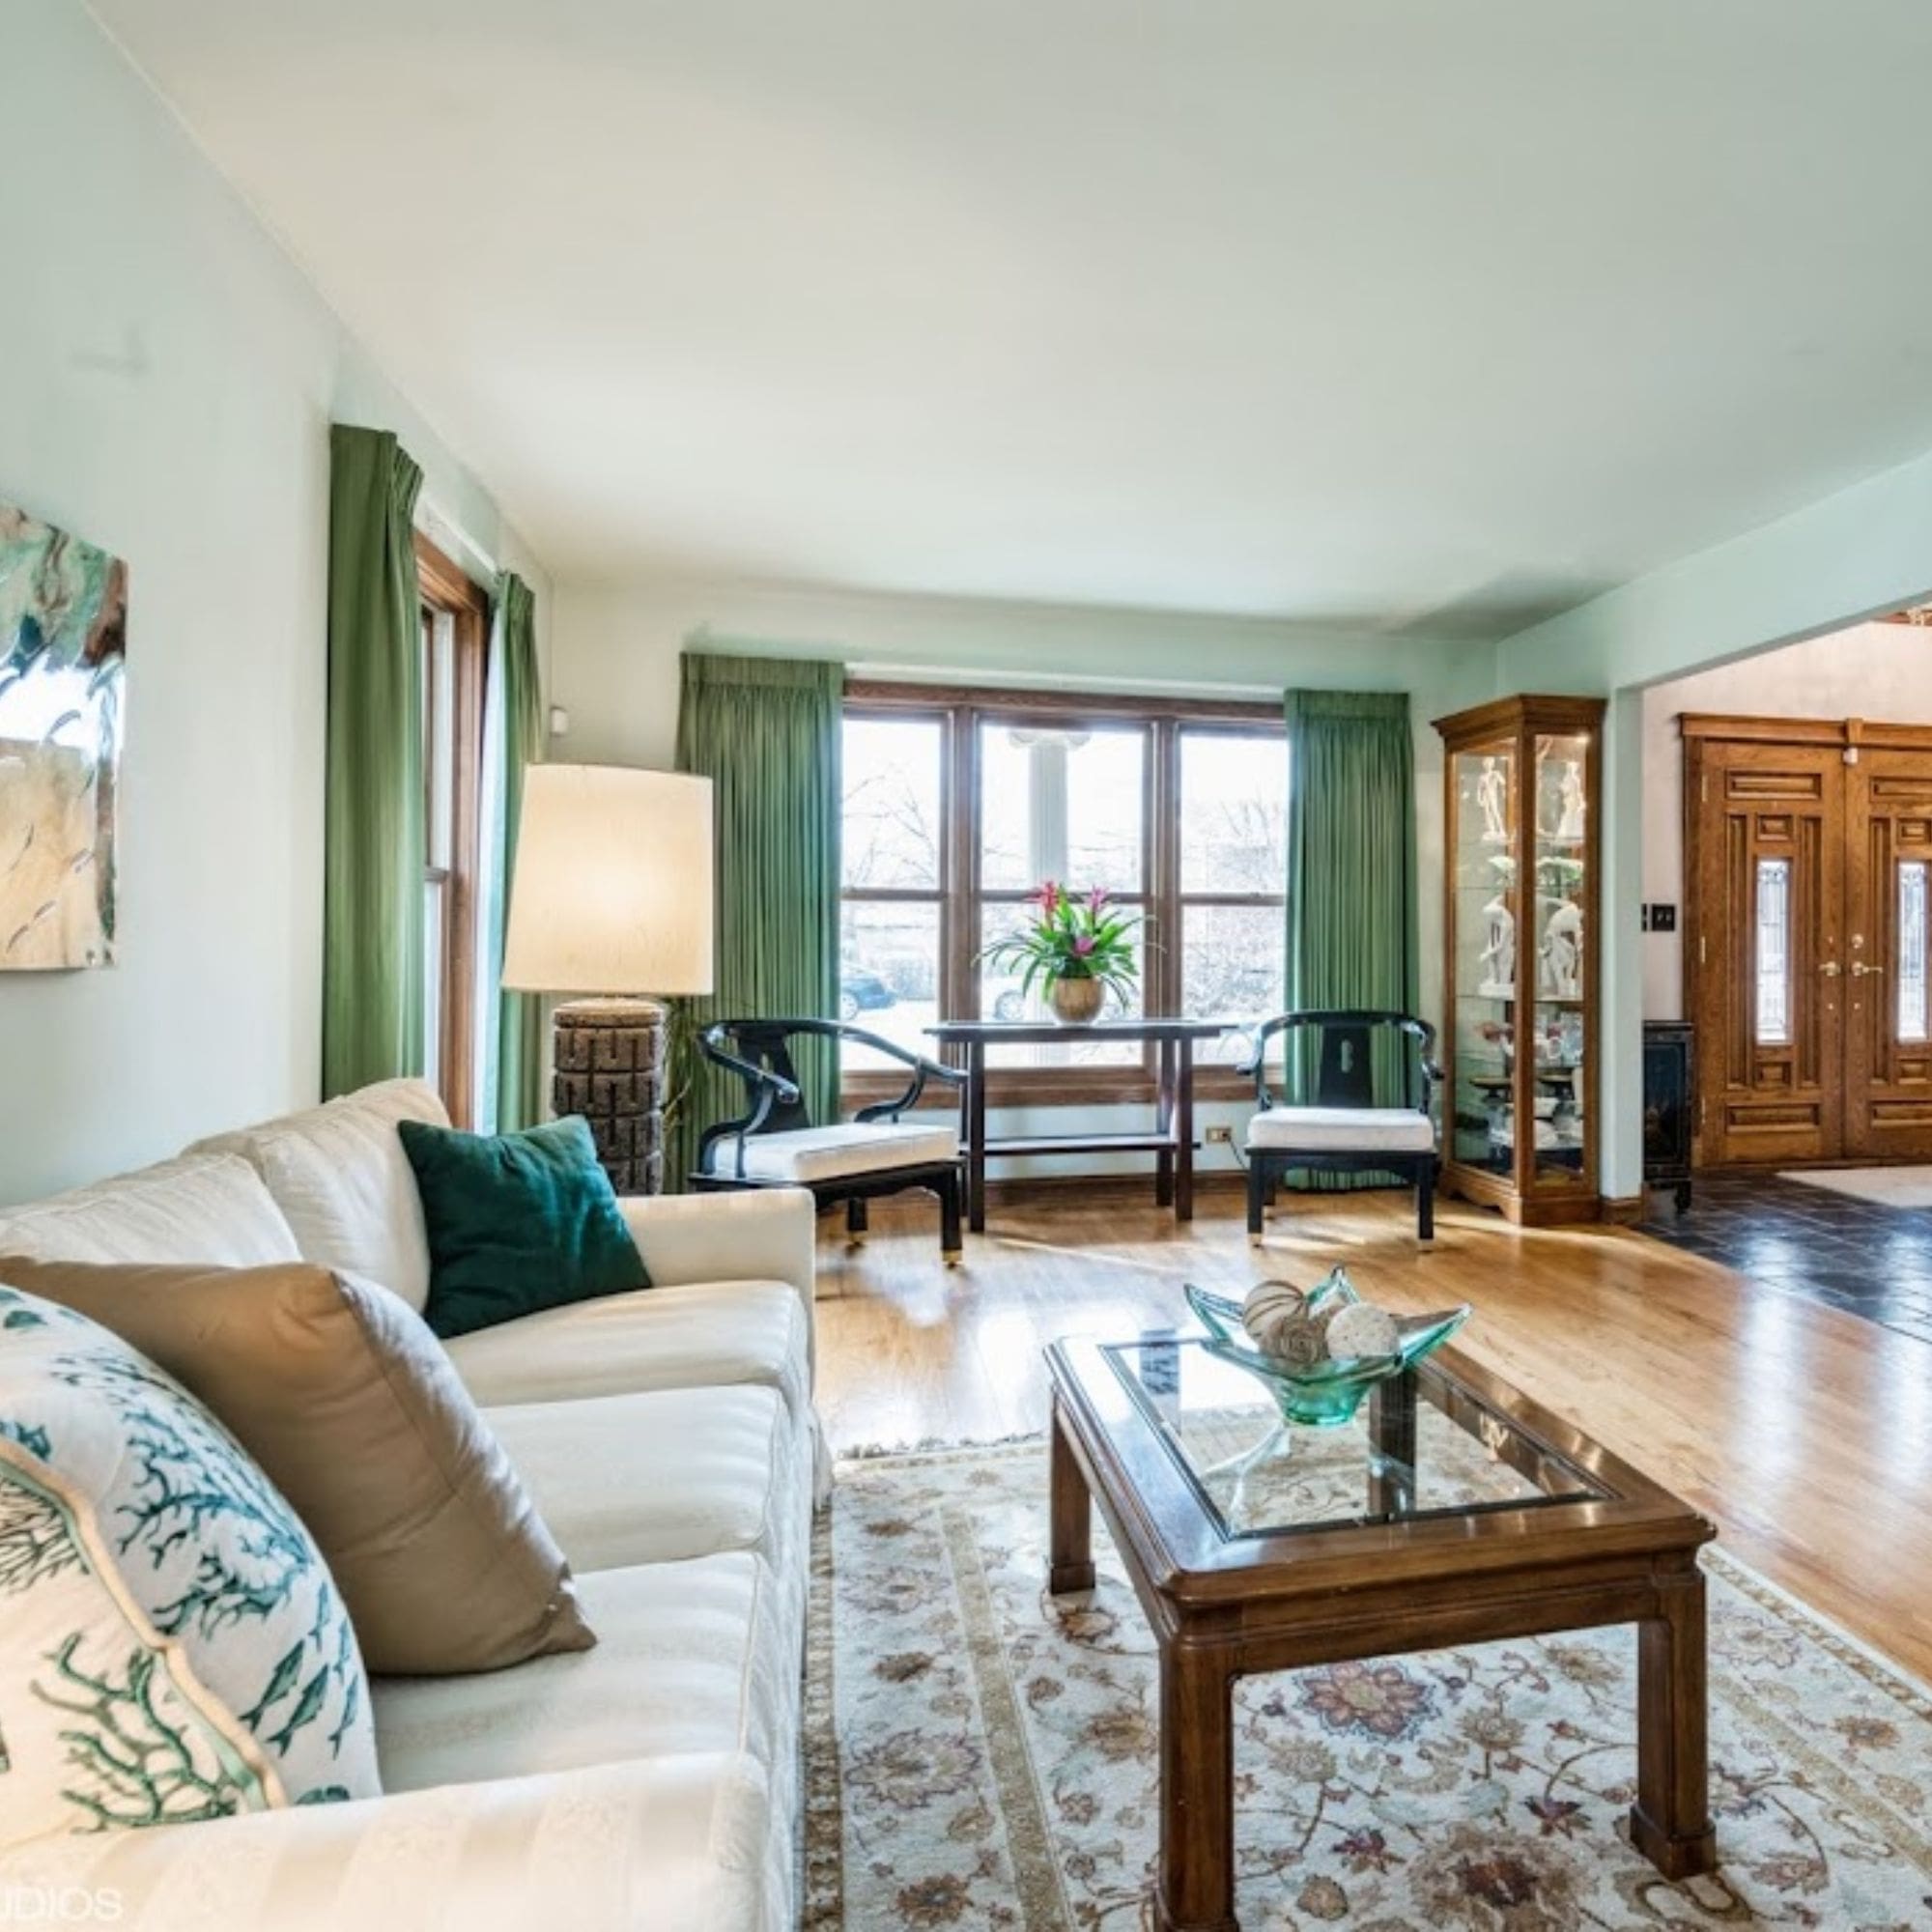 A stylish home staged living room featuring vibrant green curtains and elegant hardwood floors.